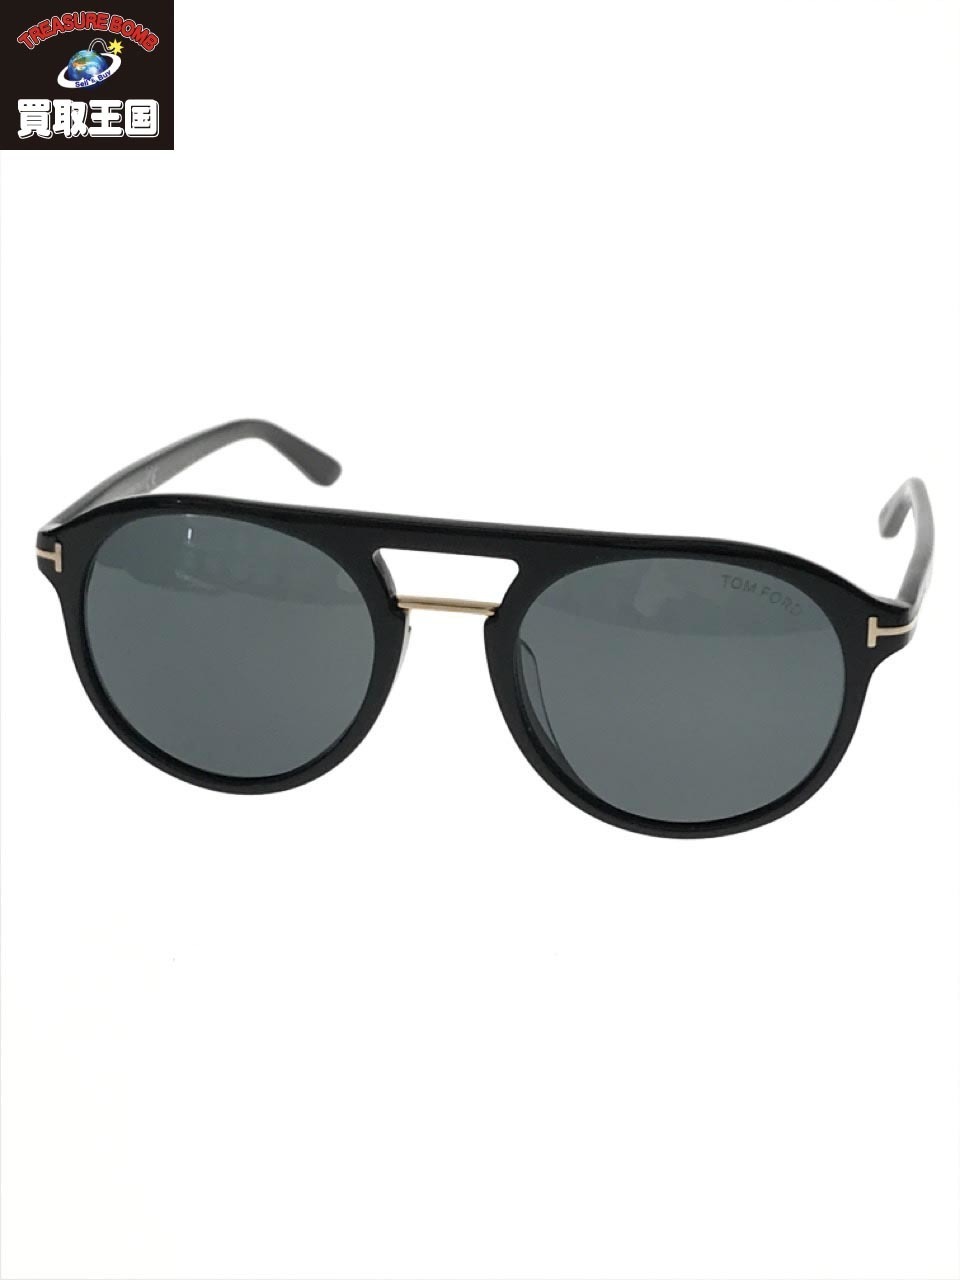 USED TOM FORD IVAN-02 TF675 VERYGOOD #E29